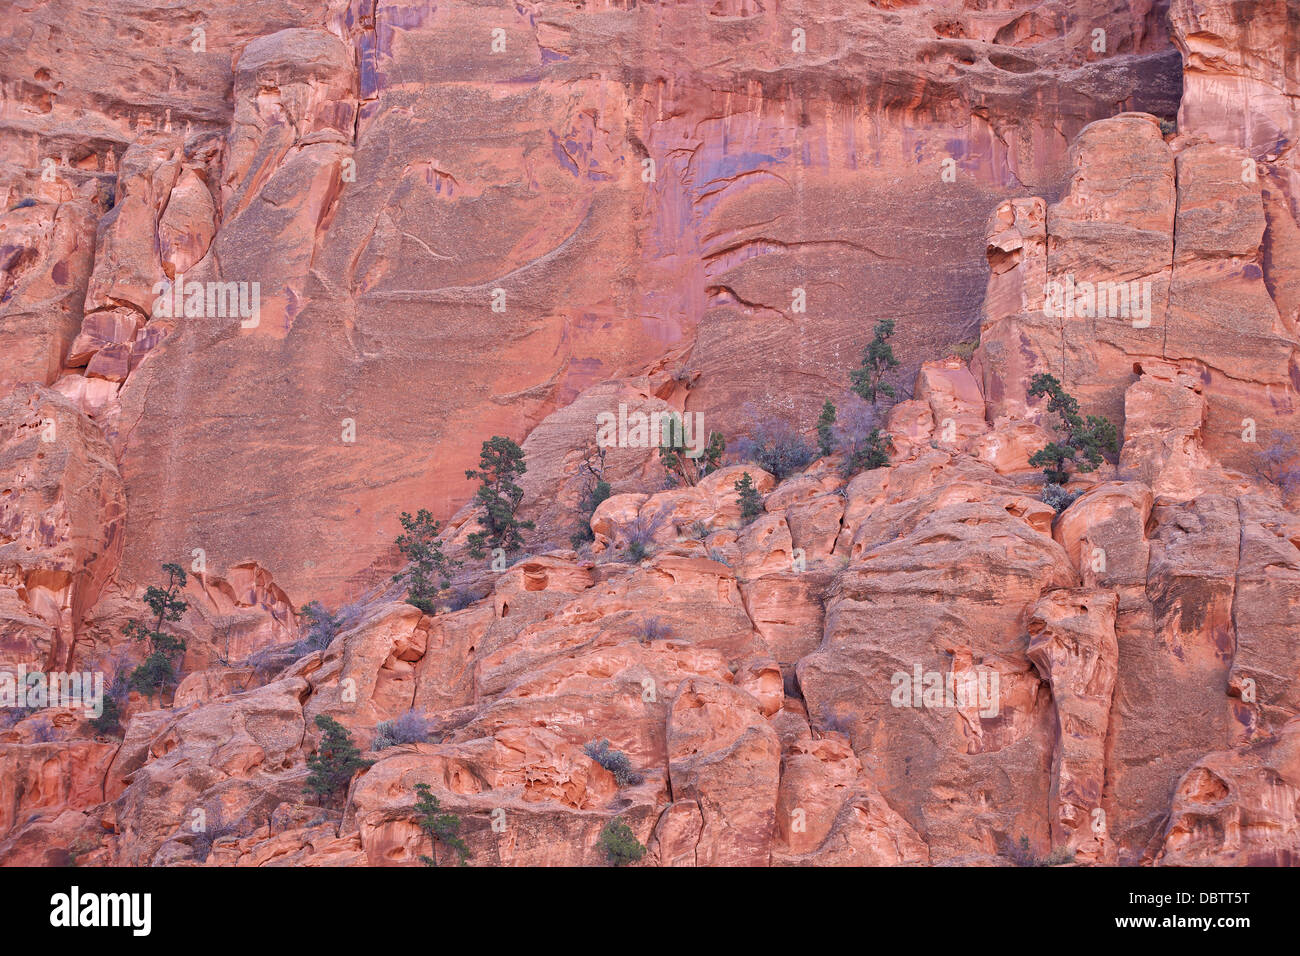 Salmon-coloured sandstone wall with evergreens, Grand Staircase-Escalante National Monument, Utah, United States of America Stock Photo